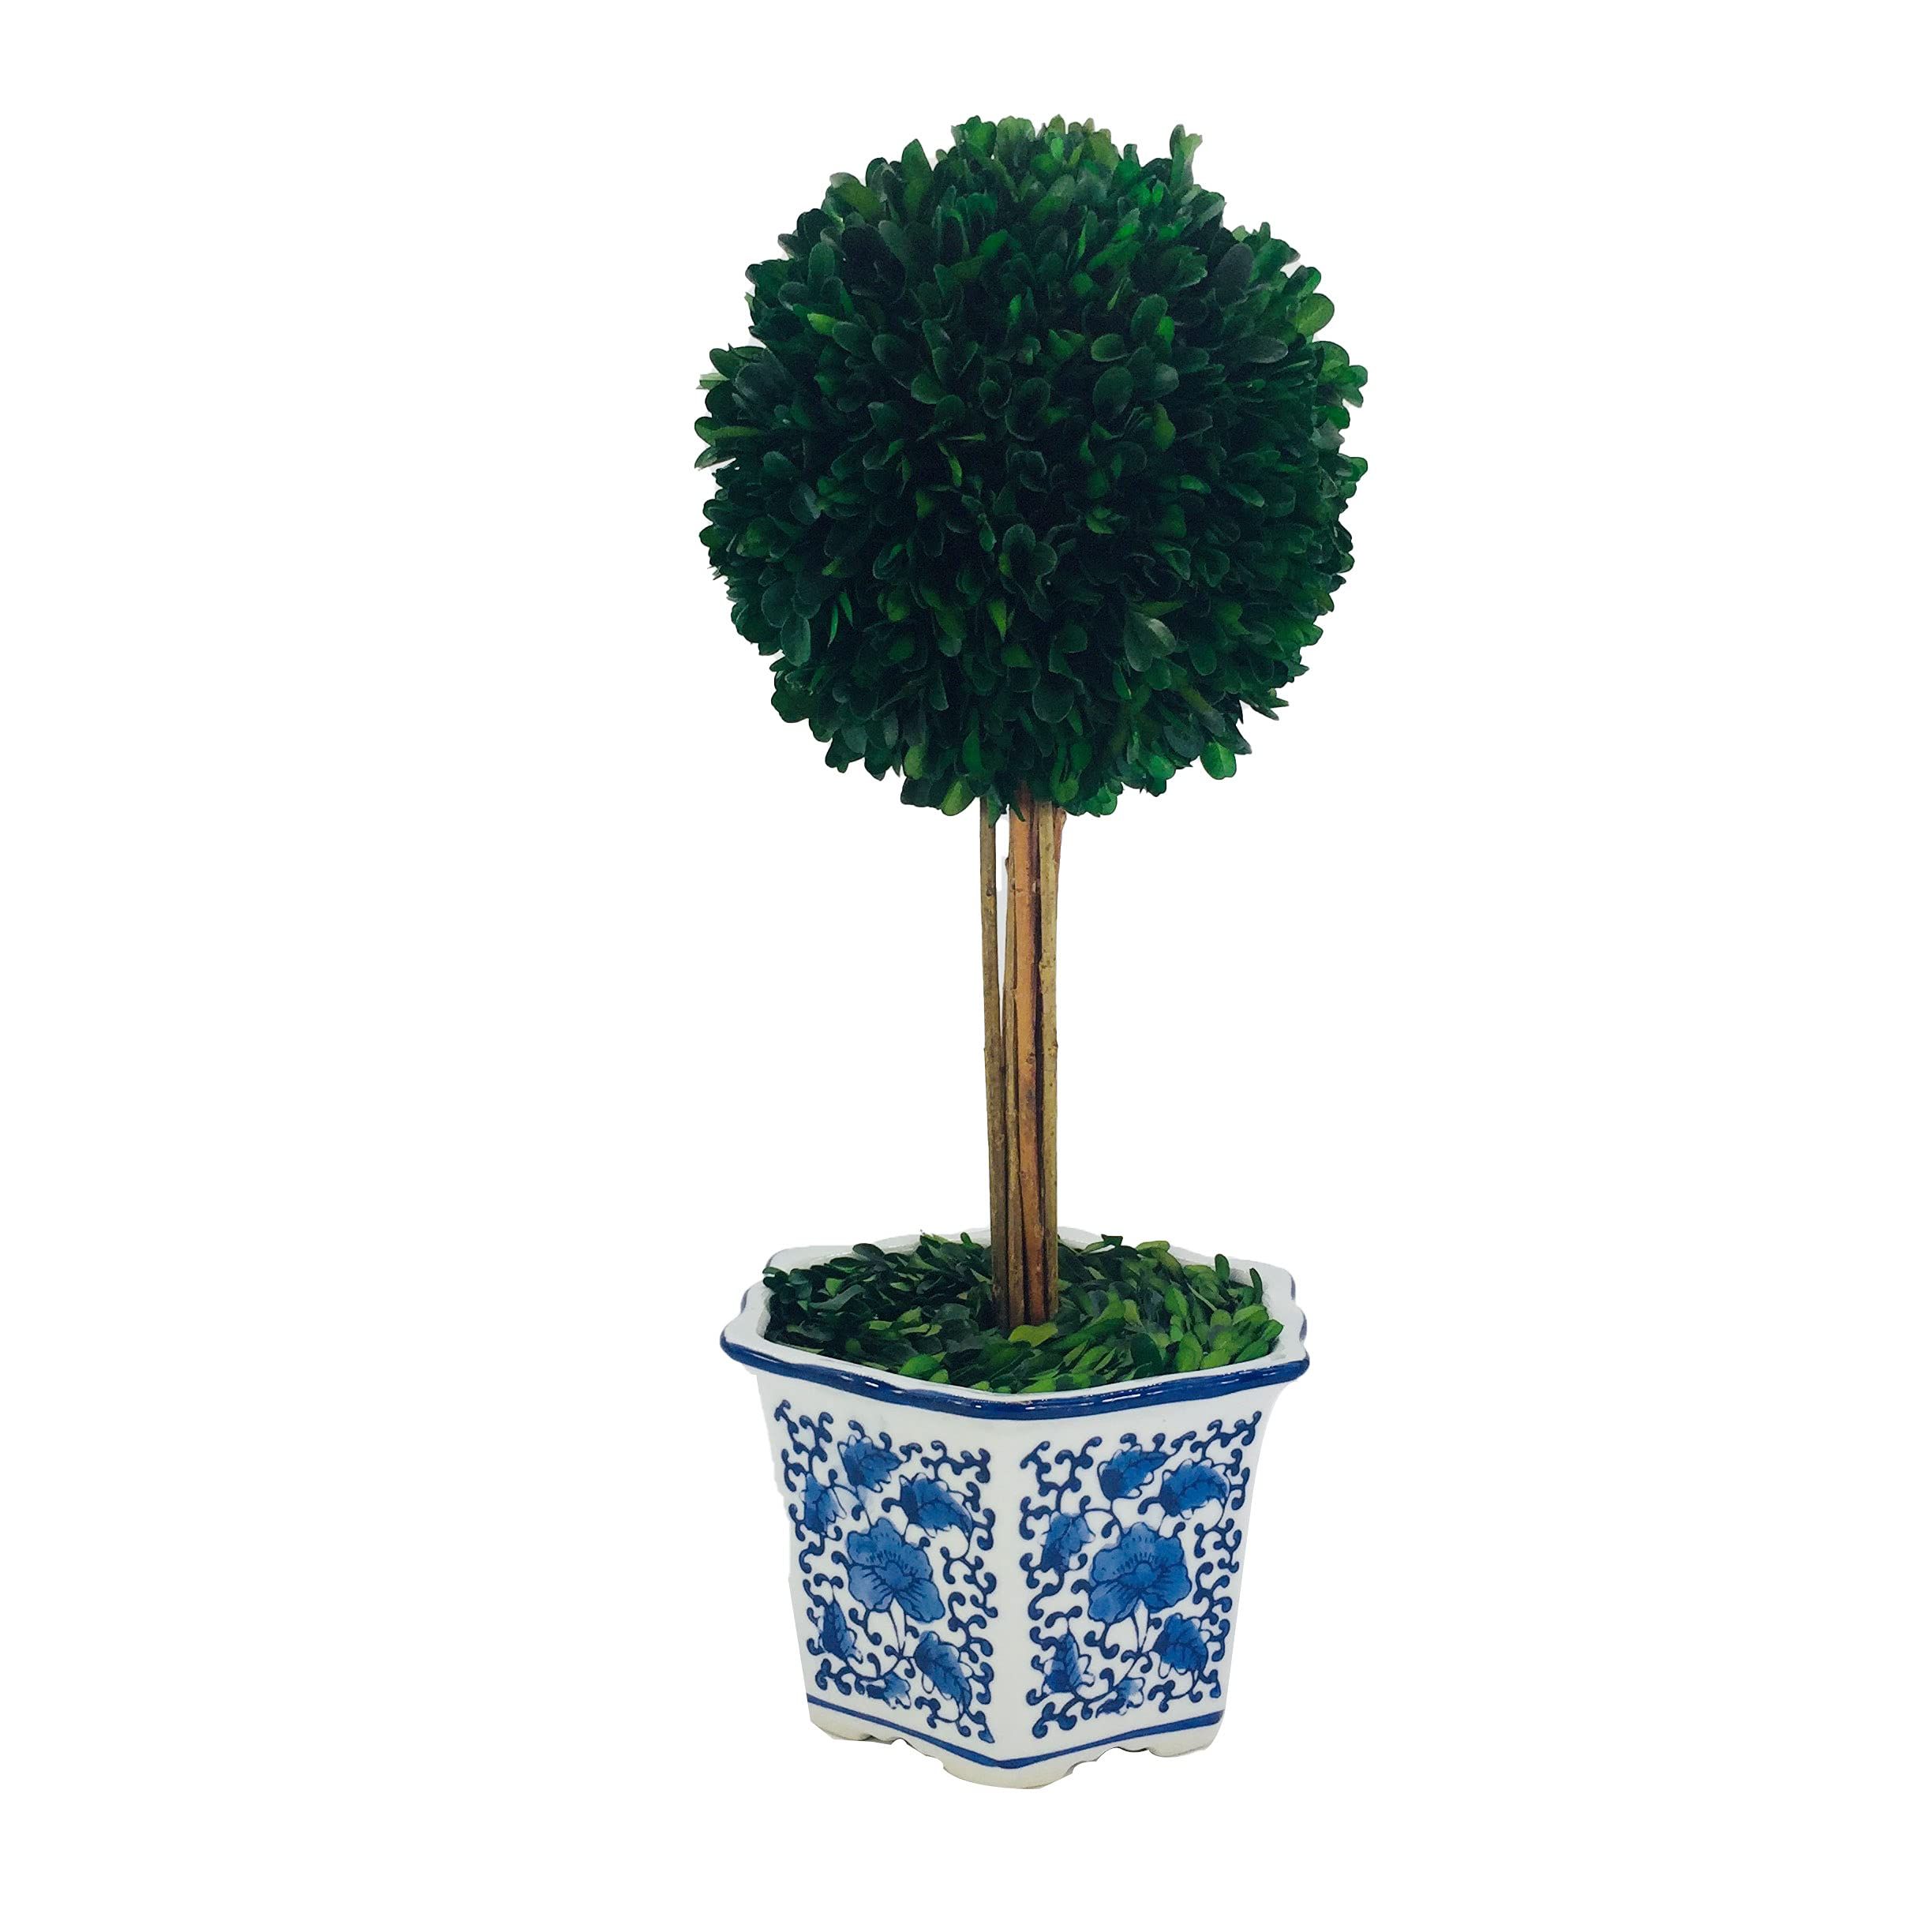 Galt International Preserved Boxwood Topiary Tree in Ceramic Pot - Plant and Table Centerpiece - Stu | Amazon (US)